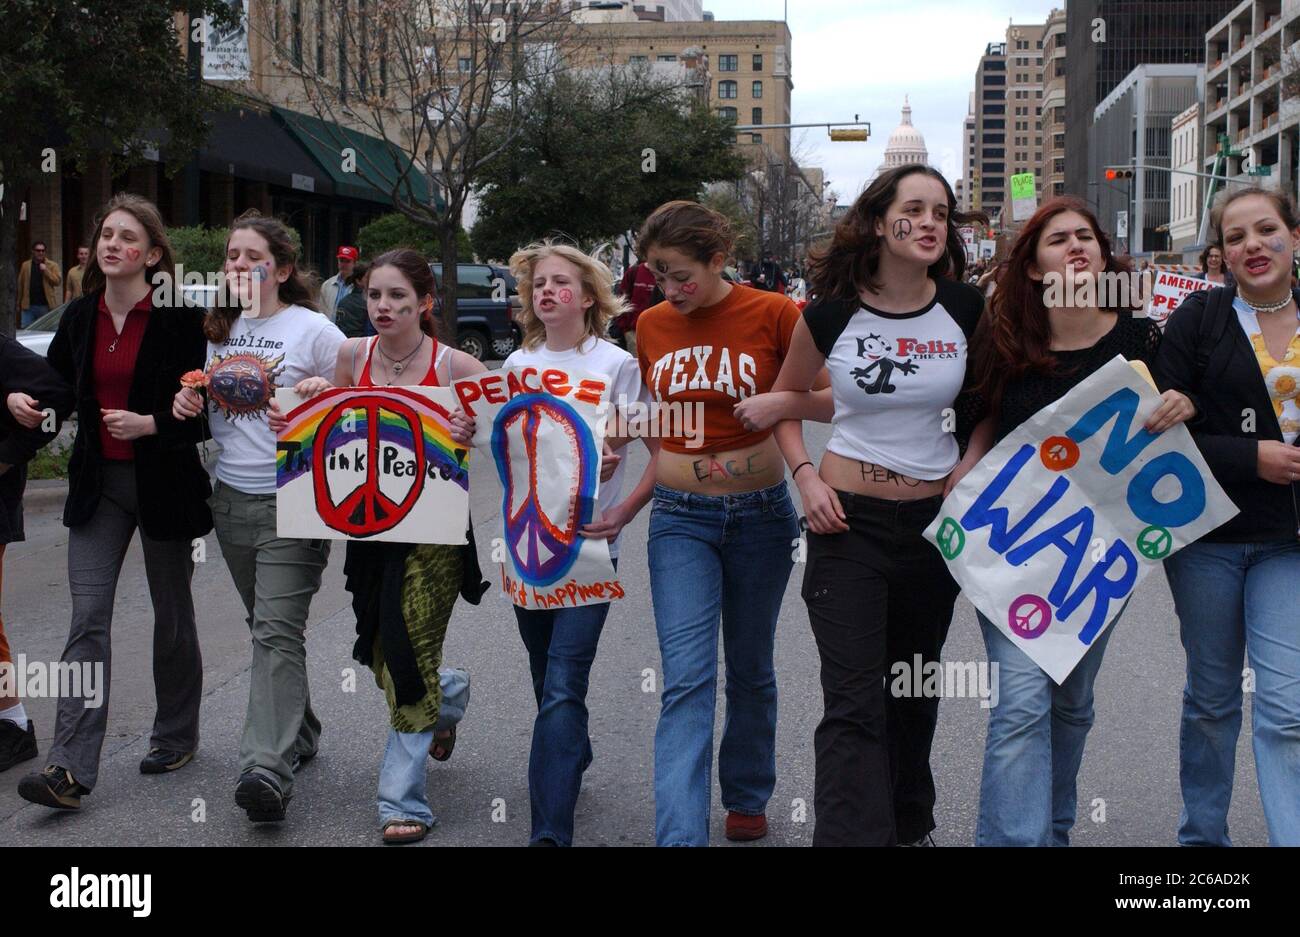 Austin, Texas 15FEB03: About 12,000 anti-war marchers rally on Saturday afternoon in the Texas capital as millions gathered worldwide to protest the United States' imminent war with Iraq. It was of the largest political demonstrations in Texas history.  Demonstrators of all ages wore costumes and banged drums, reminiscent of the U.S. anti-war rallies of the 1960's.   Photos by Bob Daemmrich, Inc. 2003 Stock Photo